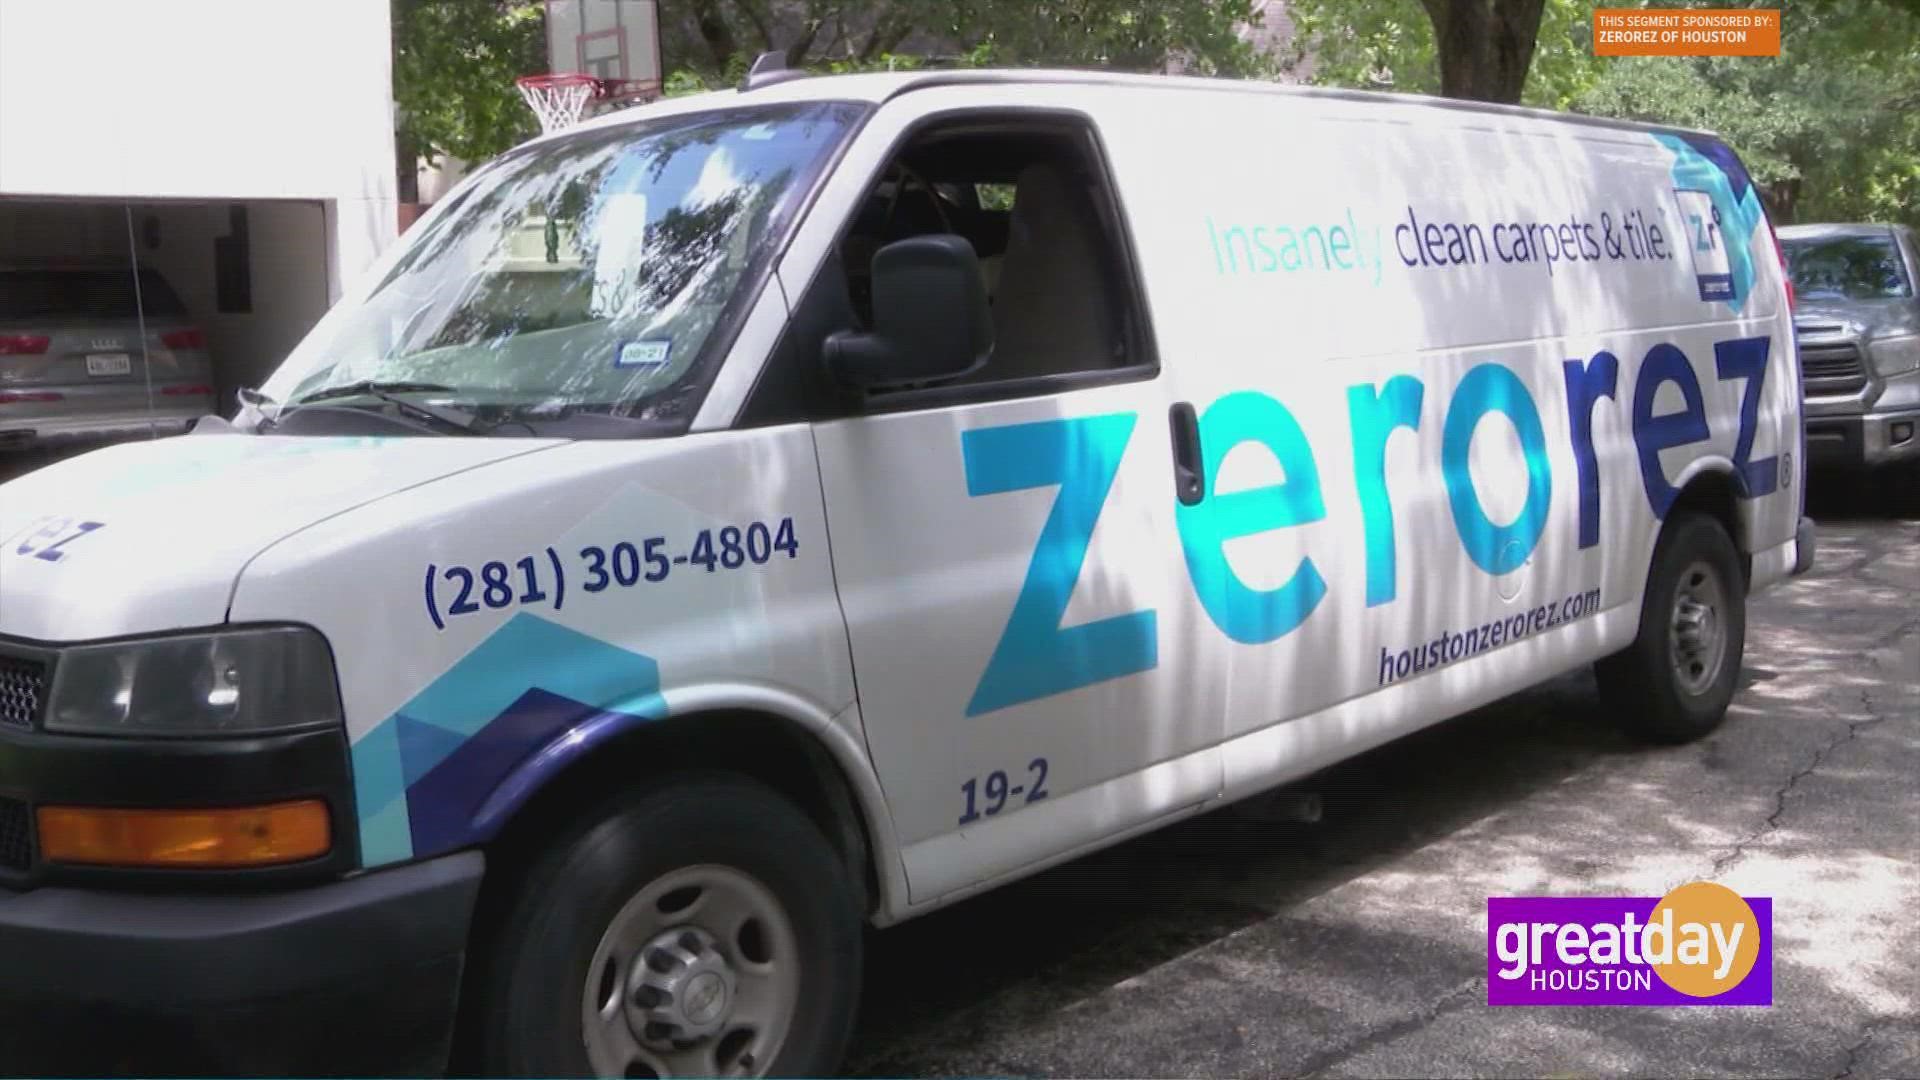 Kyle Peterson, General Manager of Zerorez of Houston, shares how Zerorez can clean your floors without any toxic chemicals or detergents.